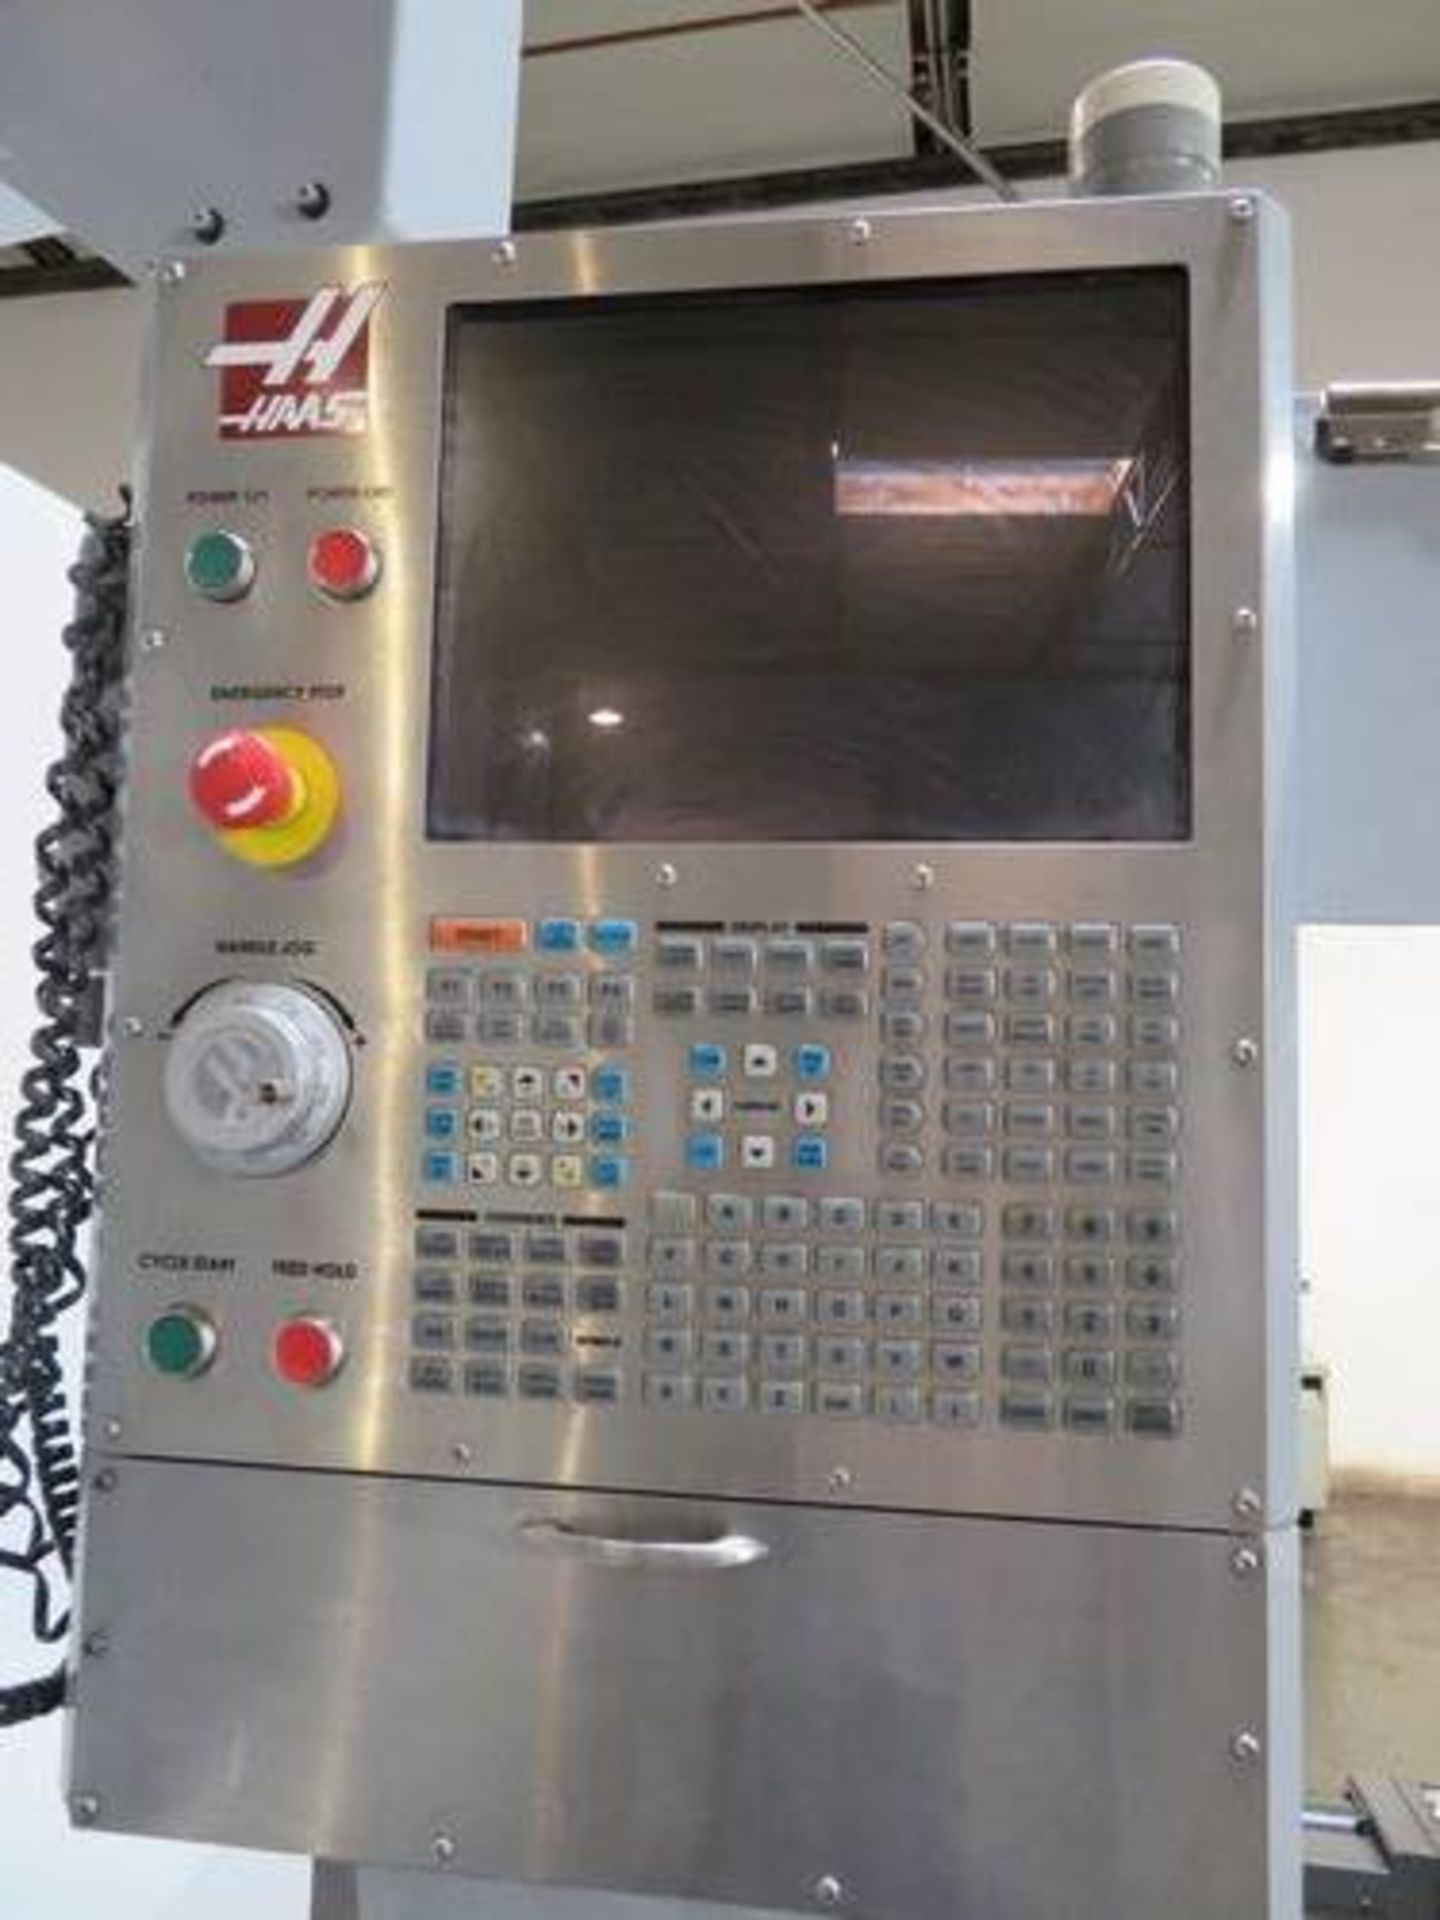 Haas TR310 5-Axis Trunion AND Haas VF6TR, 5-Axis V.M.C. Haas Control, 64" x 32" x 40" - Image 2 of 10